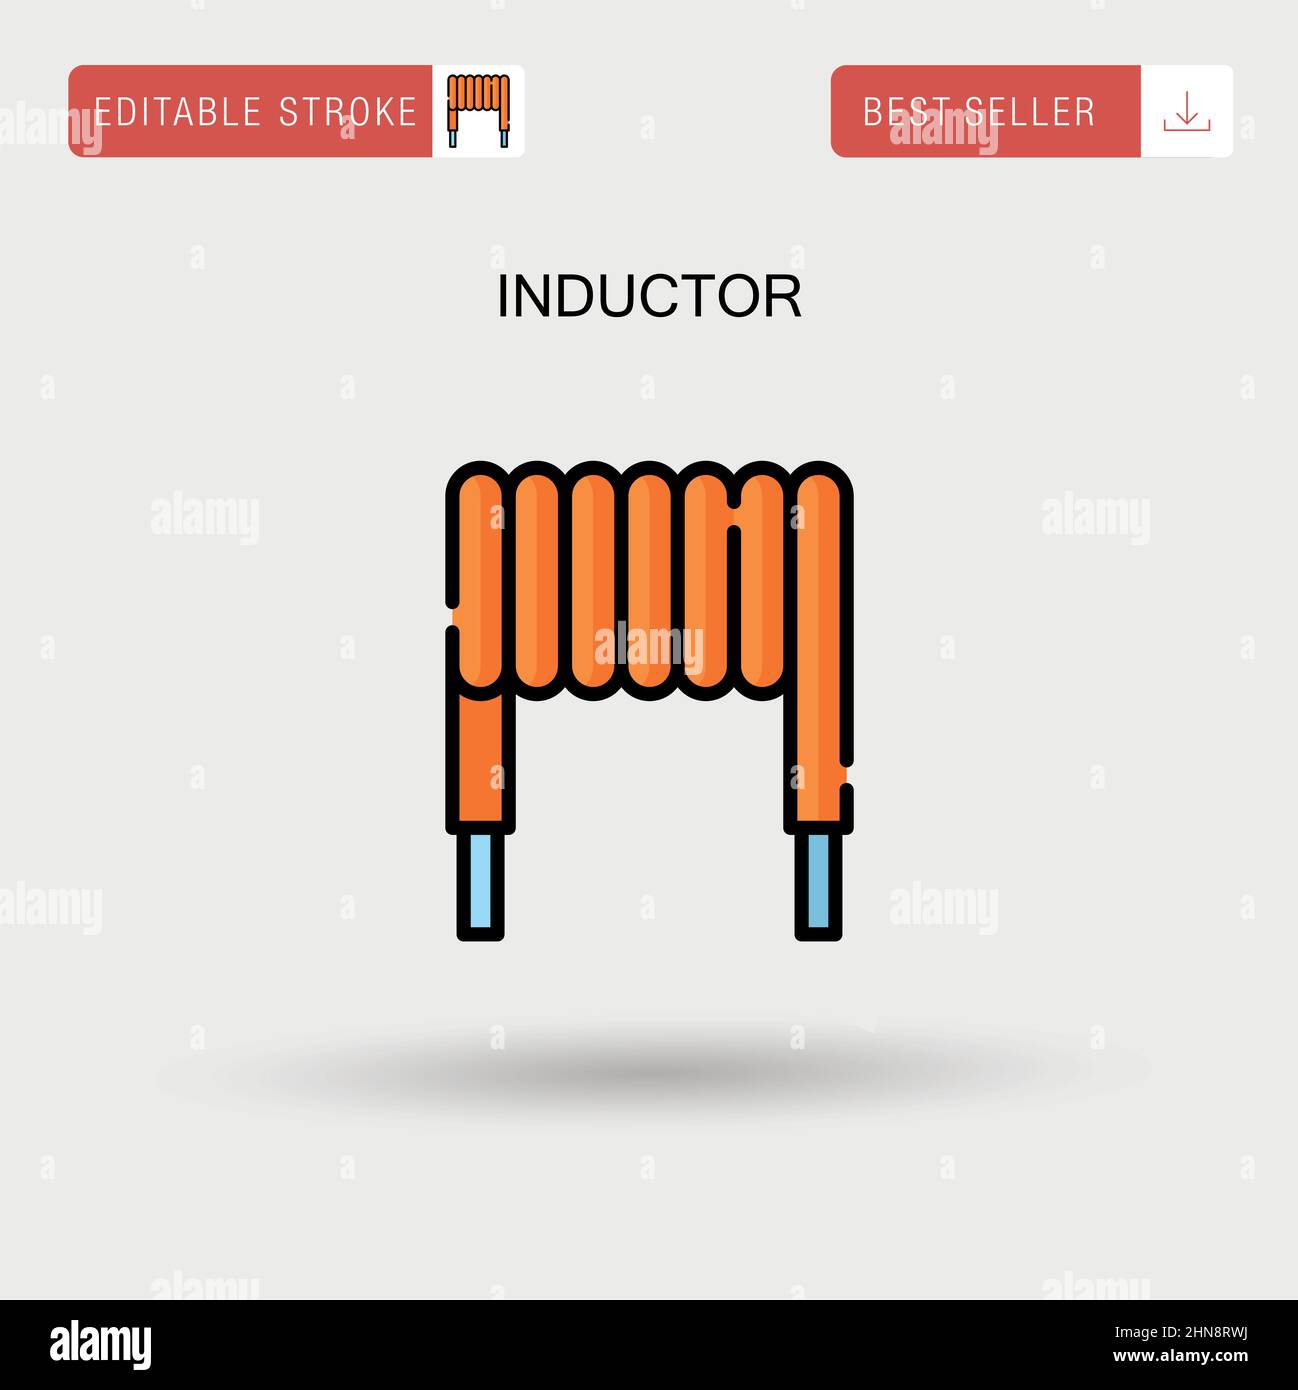 Inductor Simple vector icon. Stock Vector